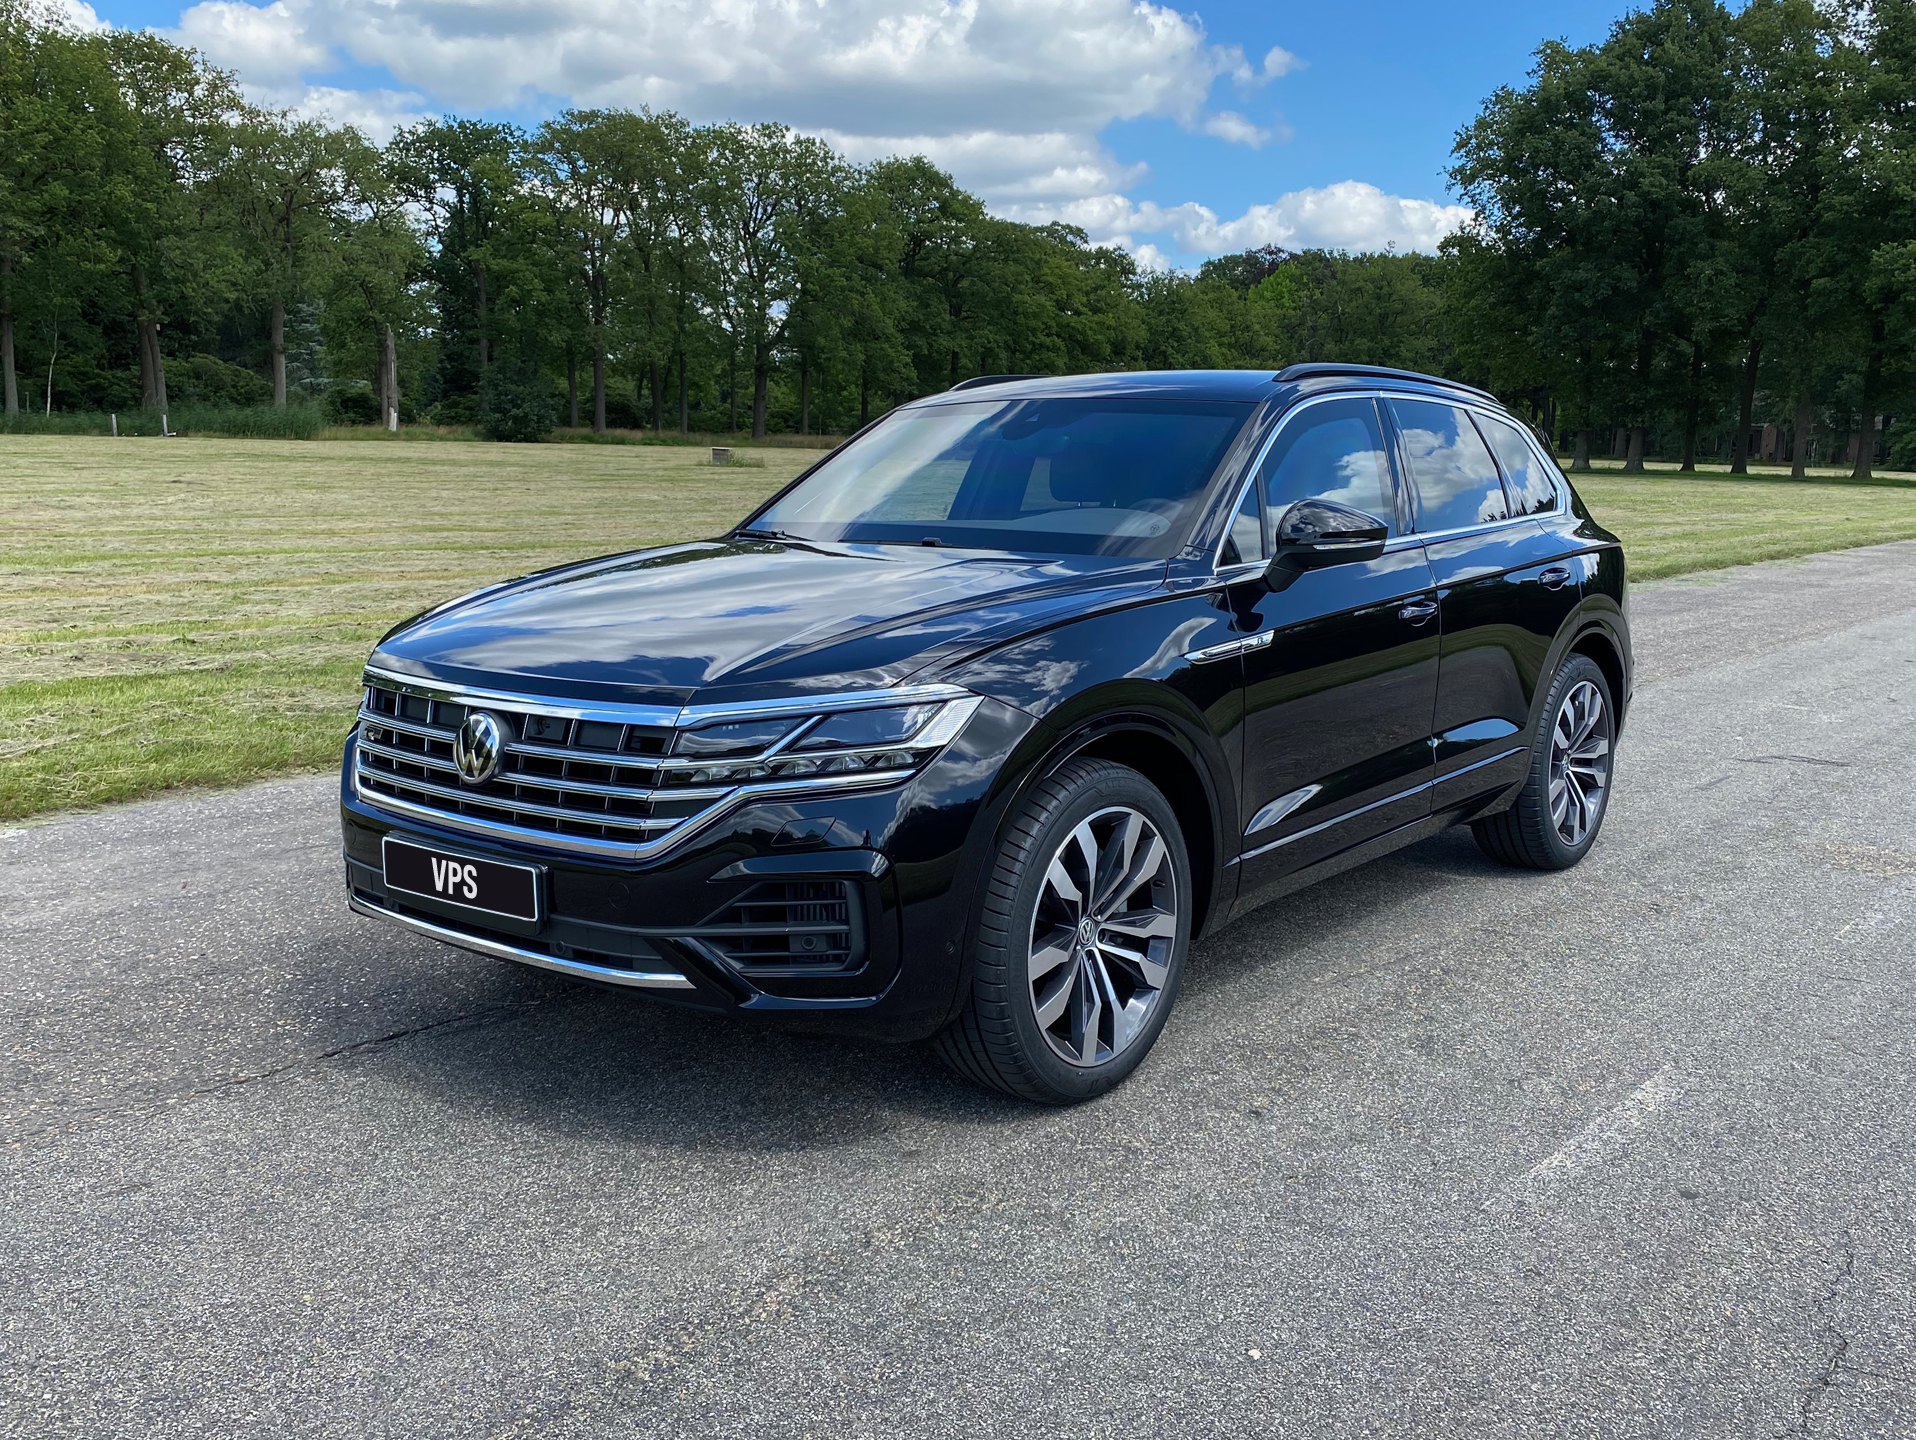 Business class discreetly armored LHD Volkswagen Touareg Respect/Business/Exclusive/R-line Diesel/Petrol 4Motion (4WD) in CEN B4, 2023 YP